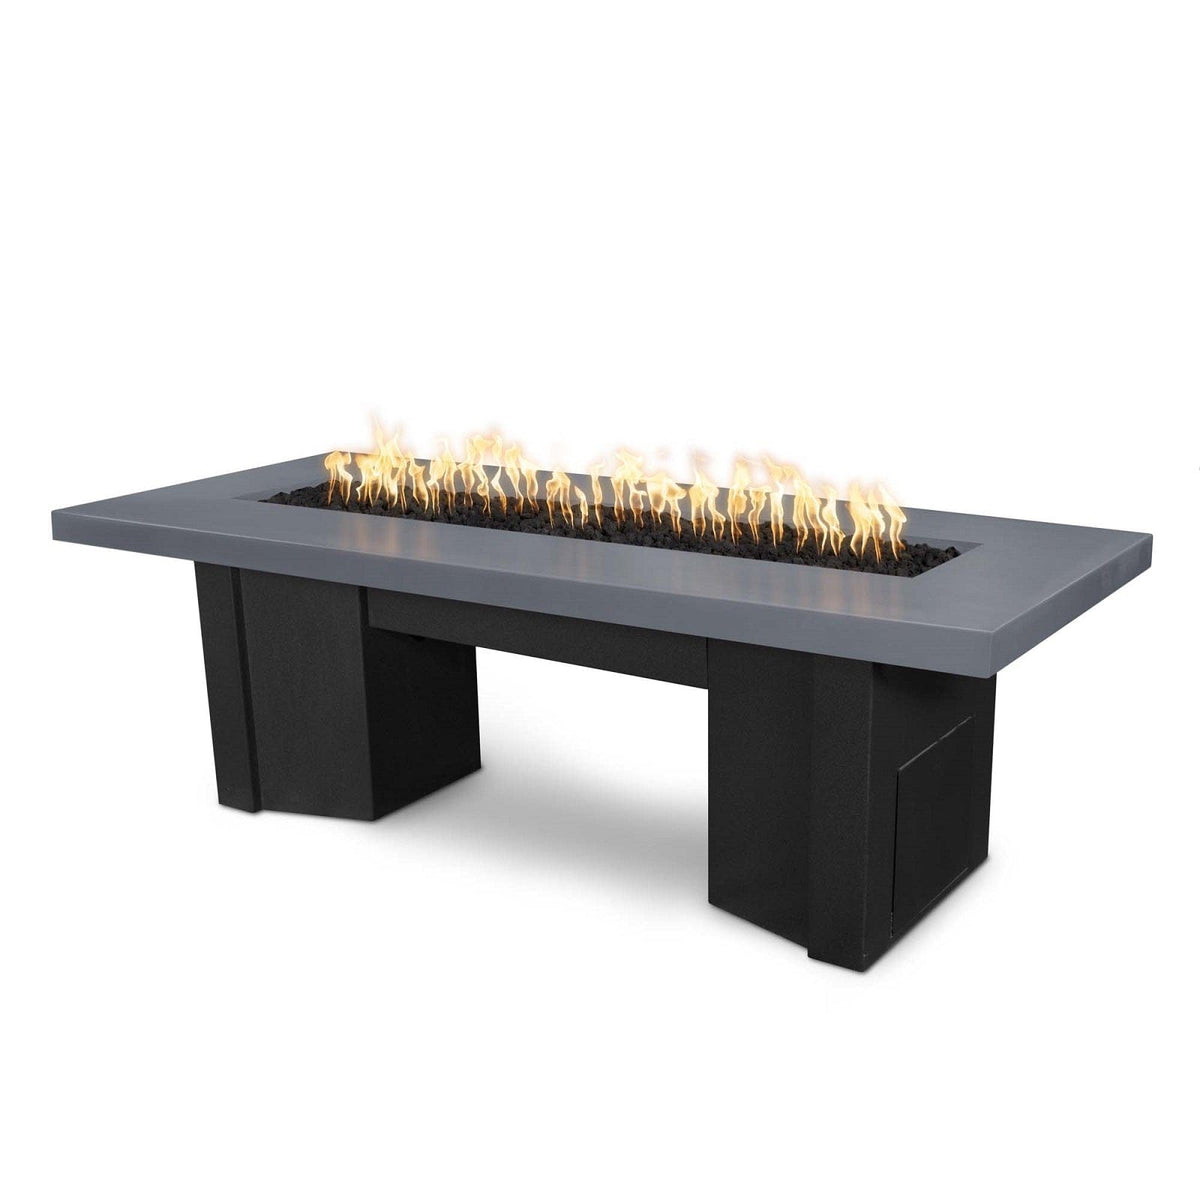 The Outdoor Plus Fire Features Gray (-GRY) / Black Powder Coated Steel (-BLK) The Outdoor Plus 60&quot; Alameda Fire Table Smooth Concrete in Liquid Propane - Match Lit / OPT-ALMGFRC60-LP